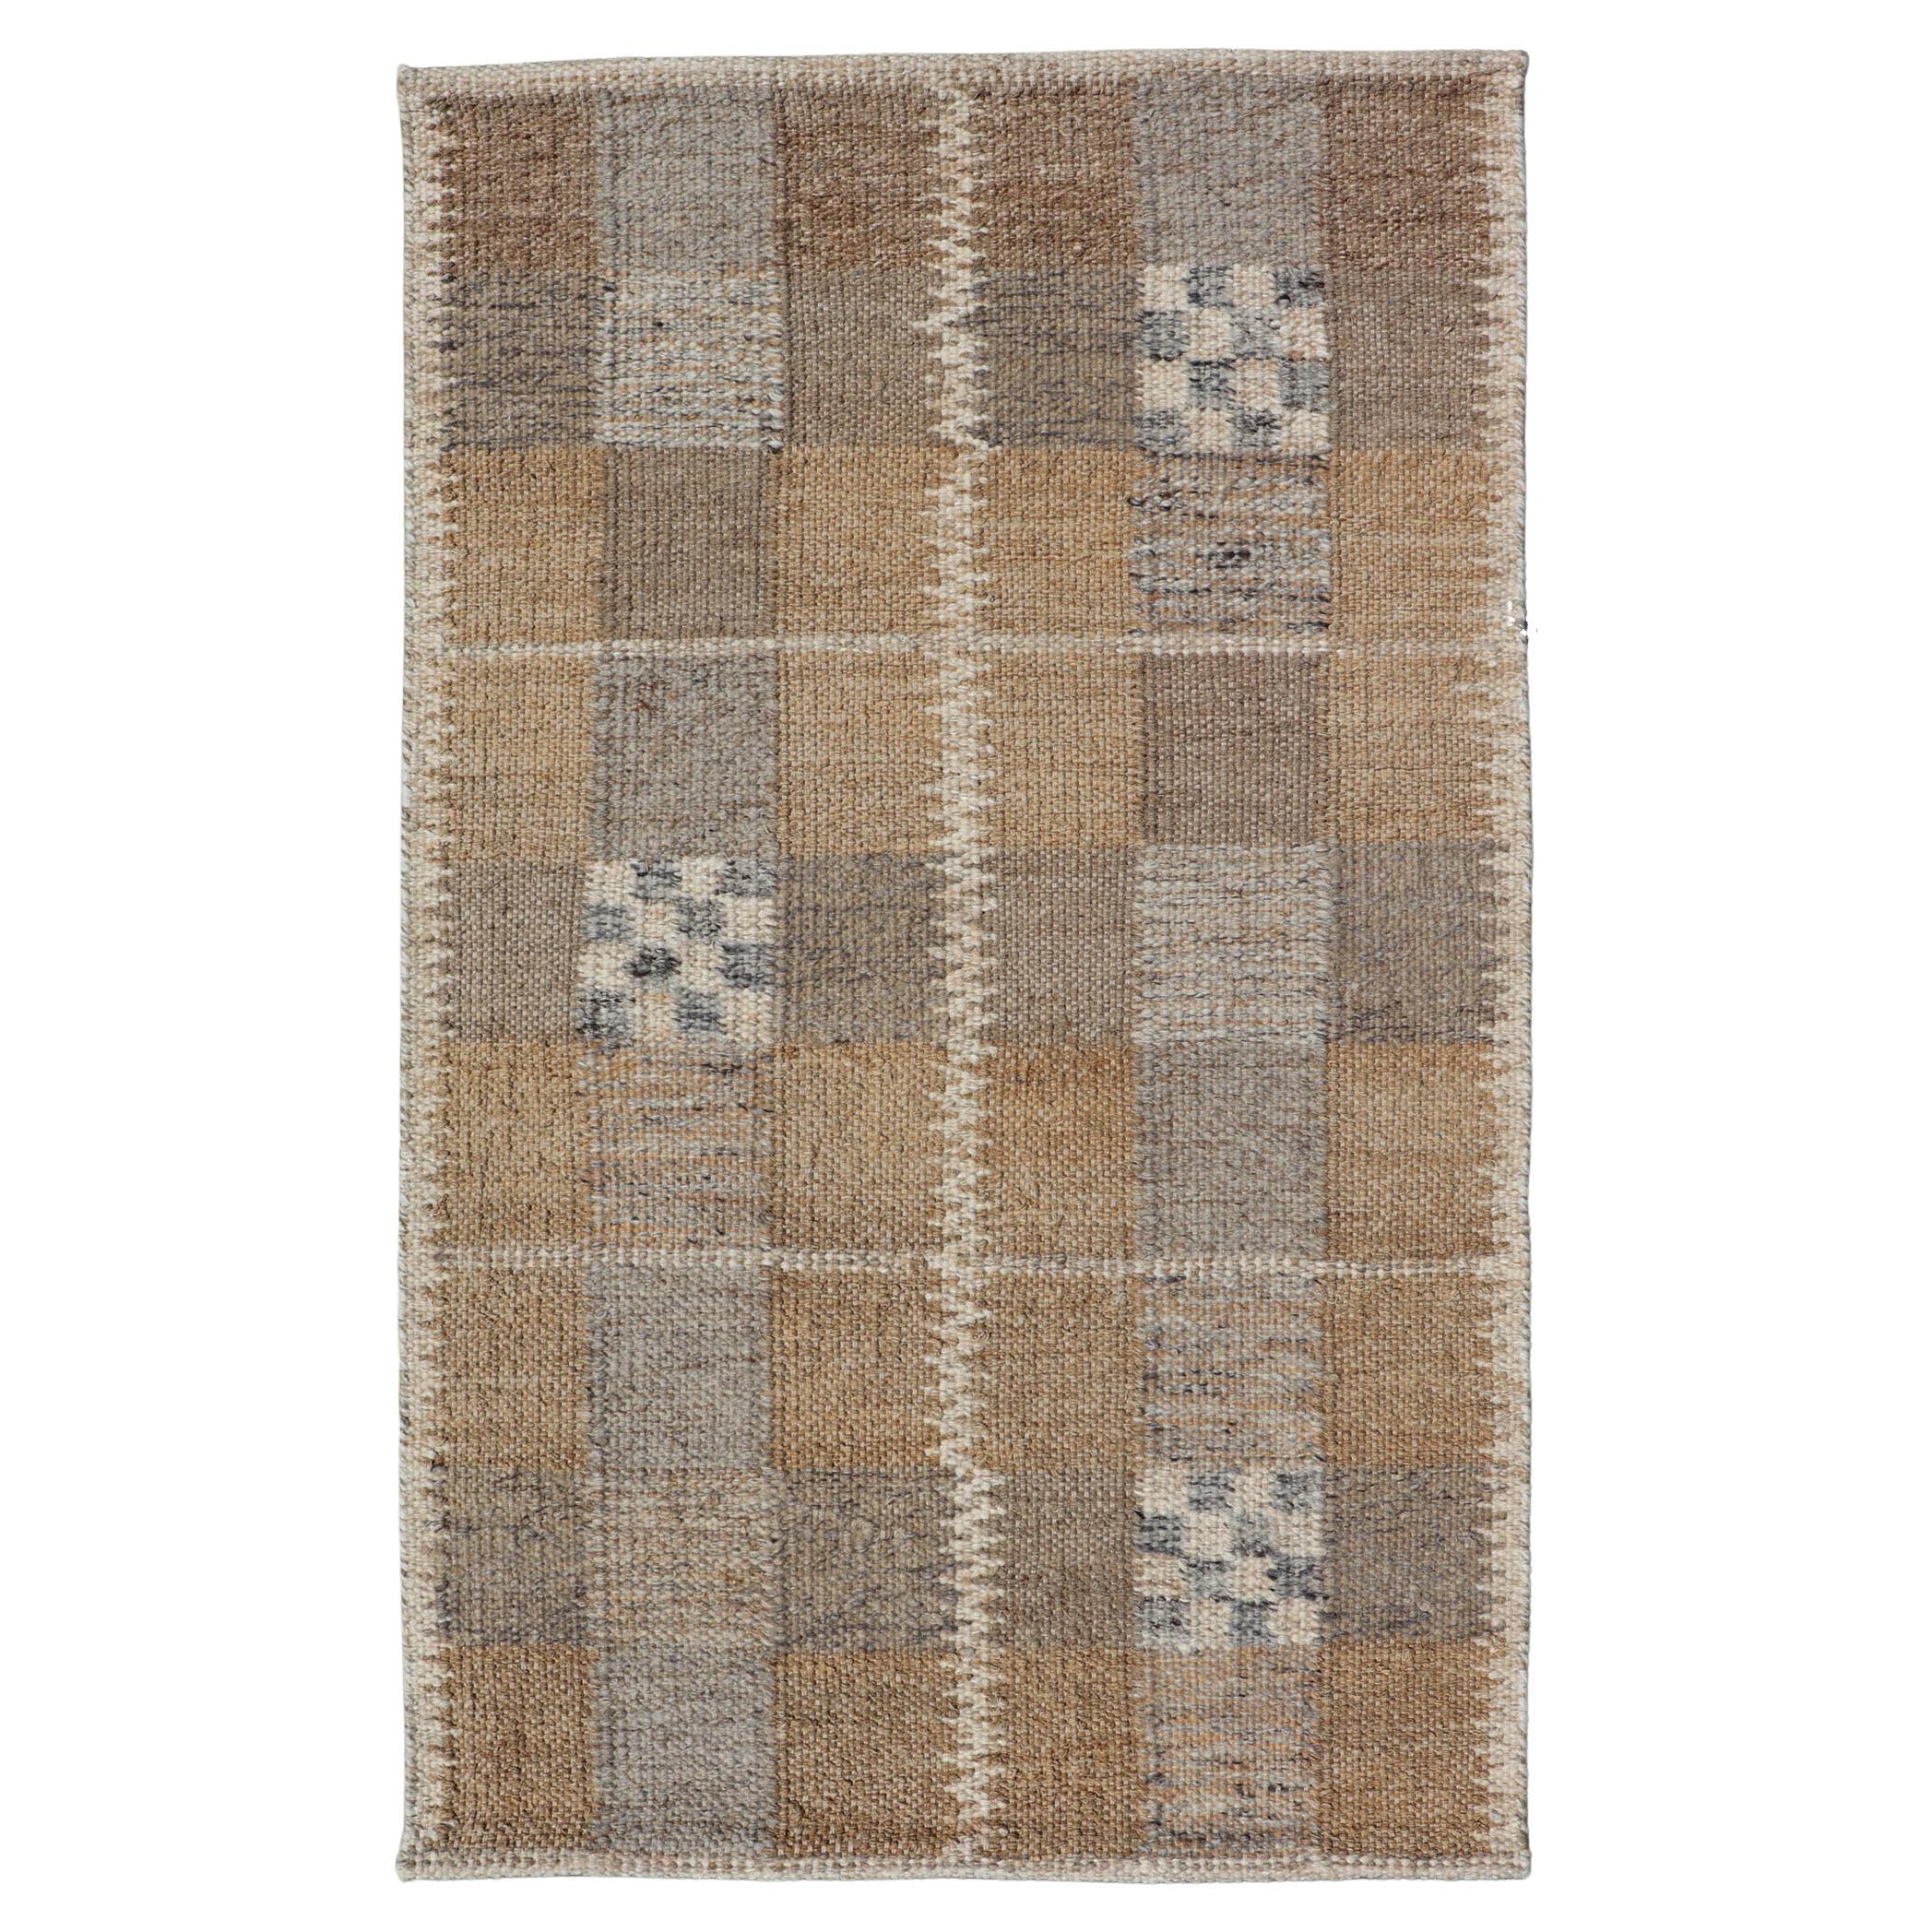  Modern Scandinavian/Swedish Box Design Rug with Earthy Color Tone's With Gray For Sale